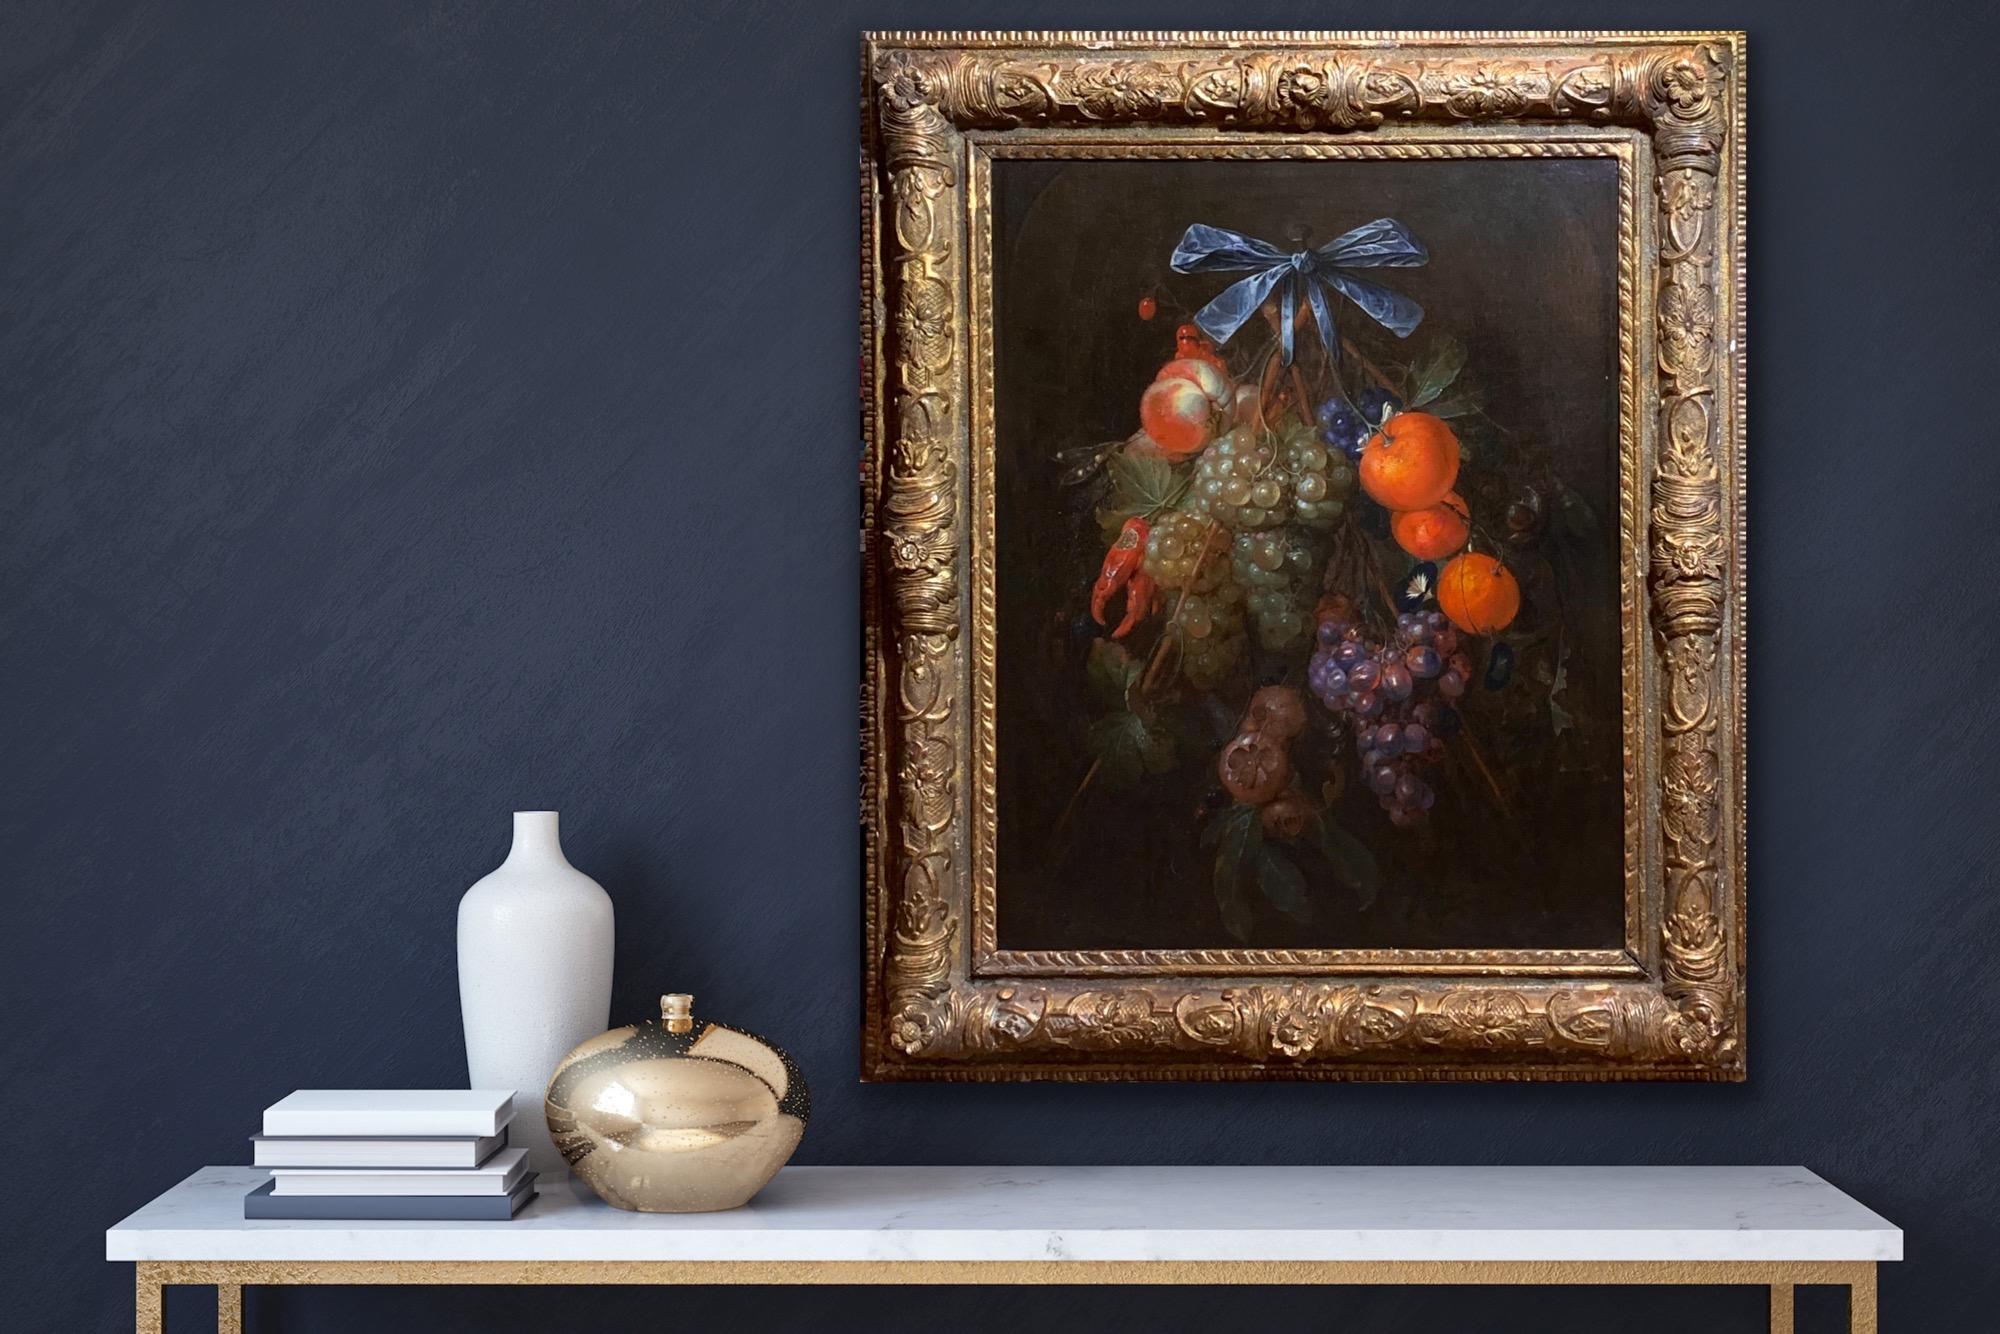 17th century dutch still-life with fruits, oranges, chili peppers and a ribbon - Painting by Cornelis de Heem